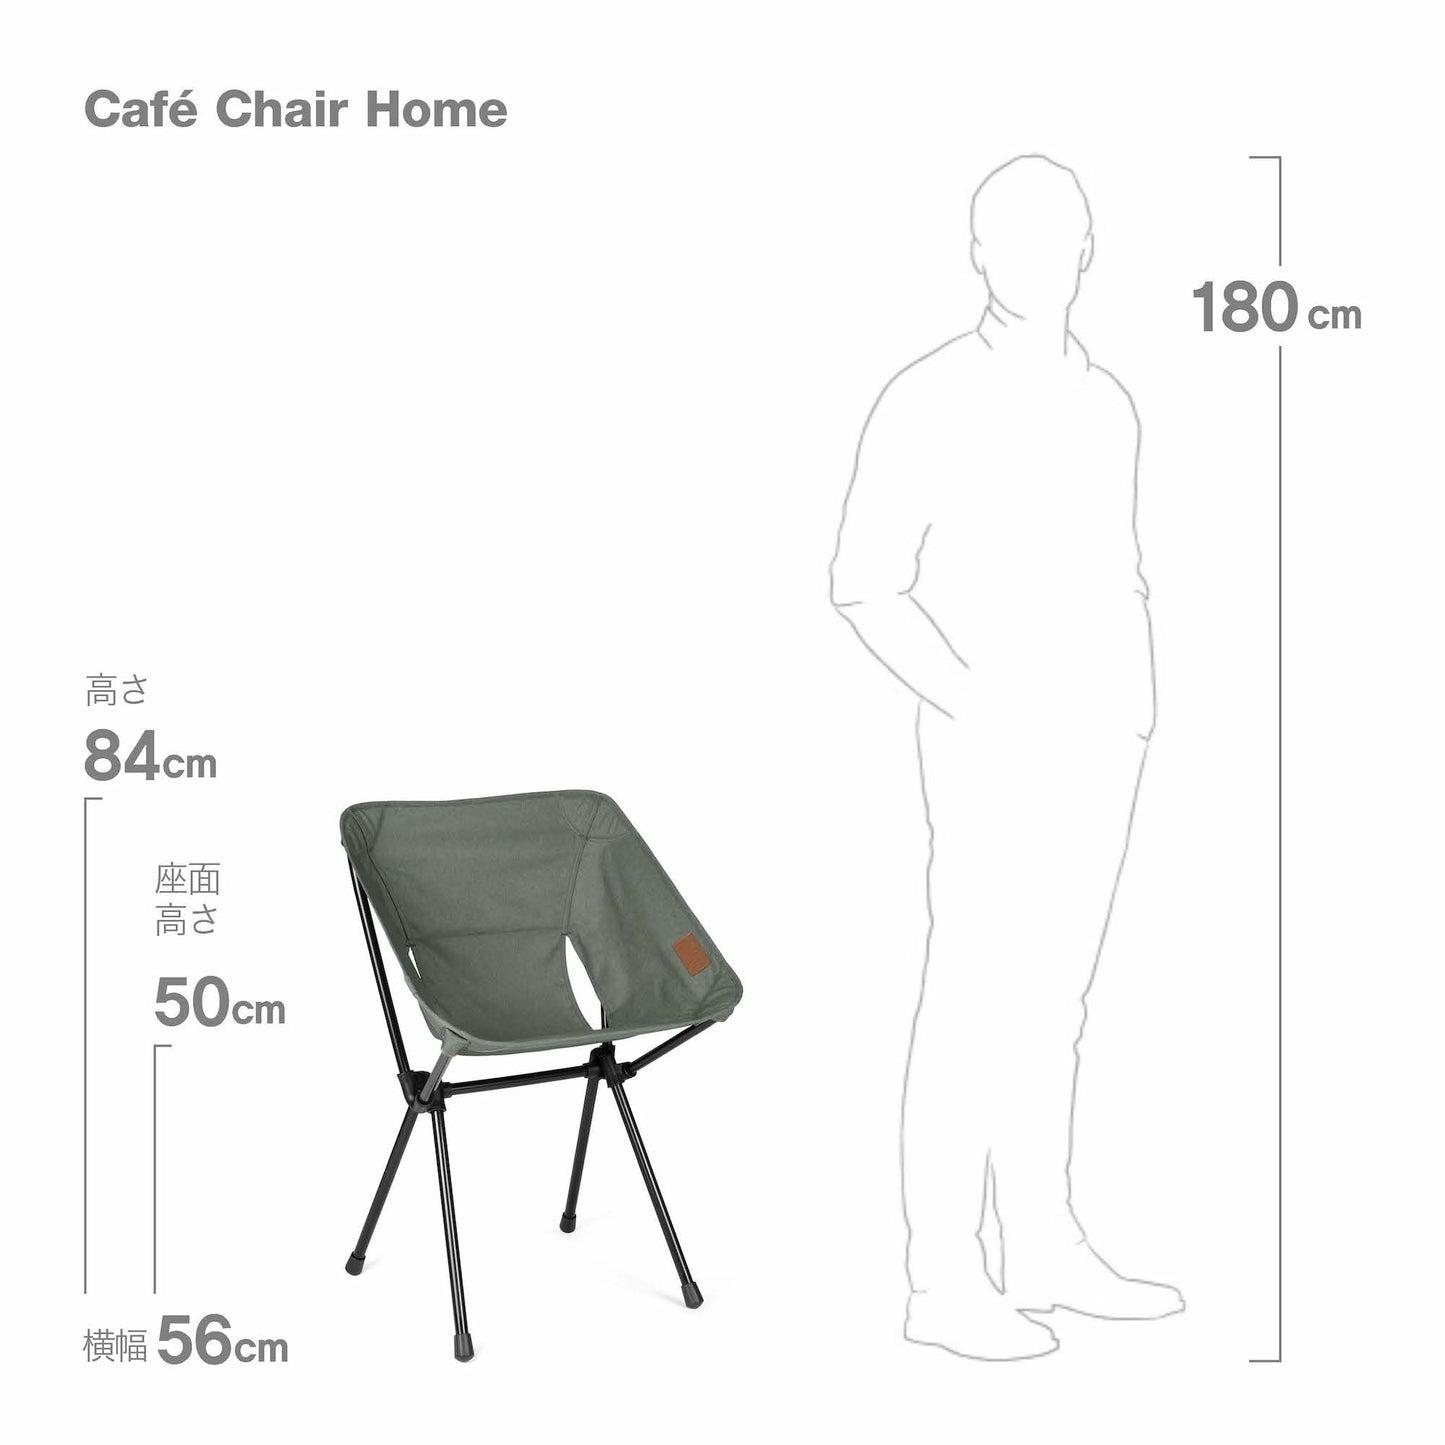 Cafe Chair Home - Gravel